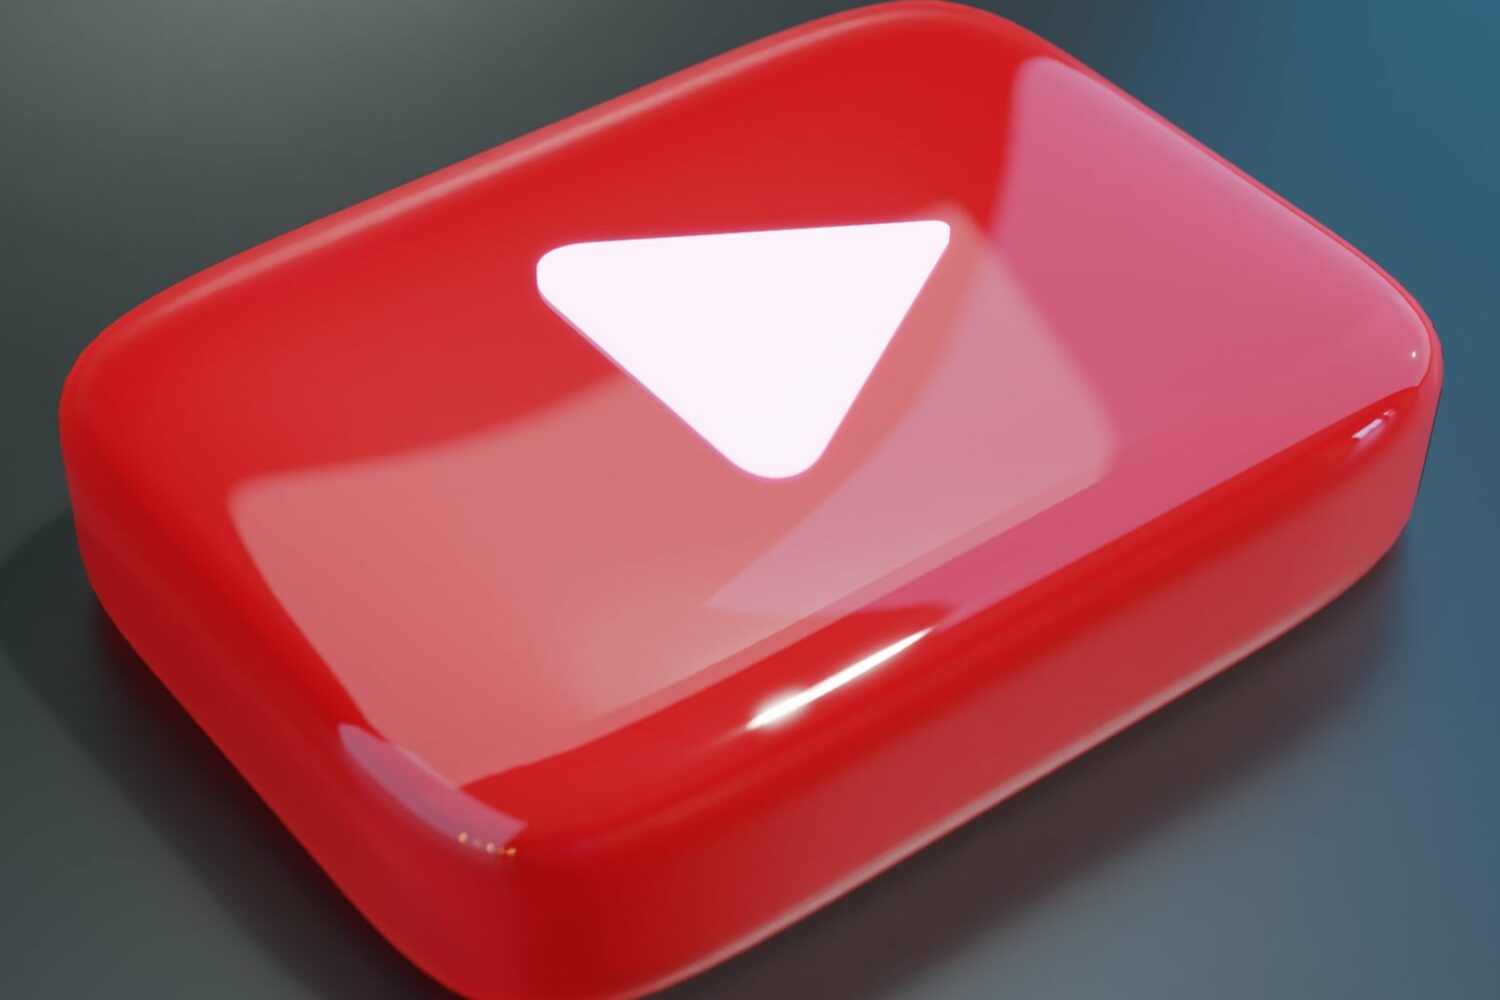 Glossy rendering of YouTube's red button with a white Play symbol